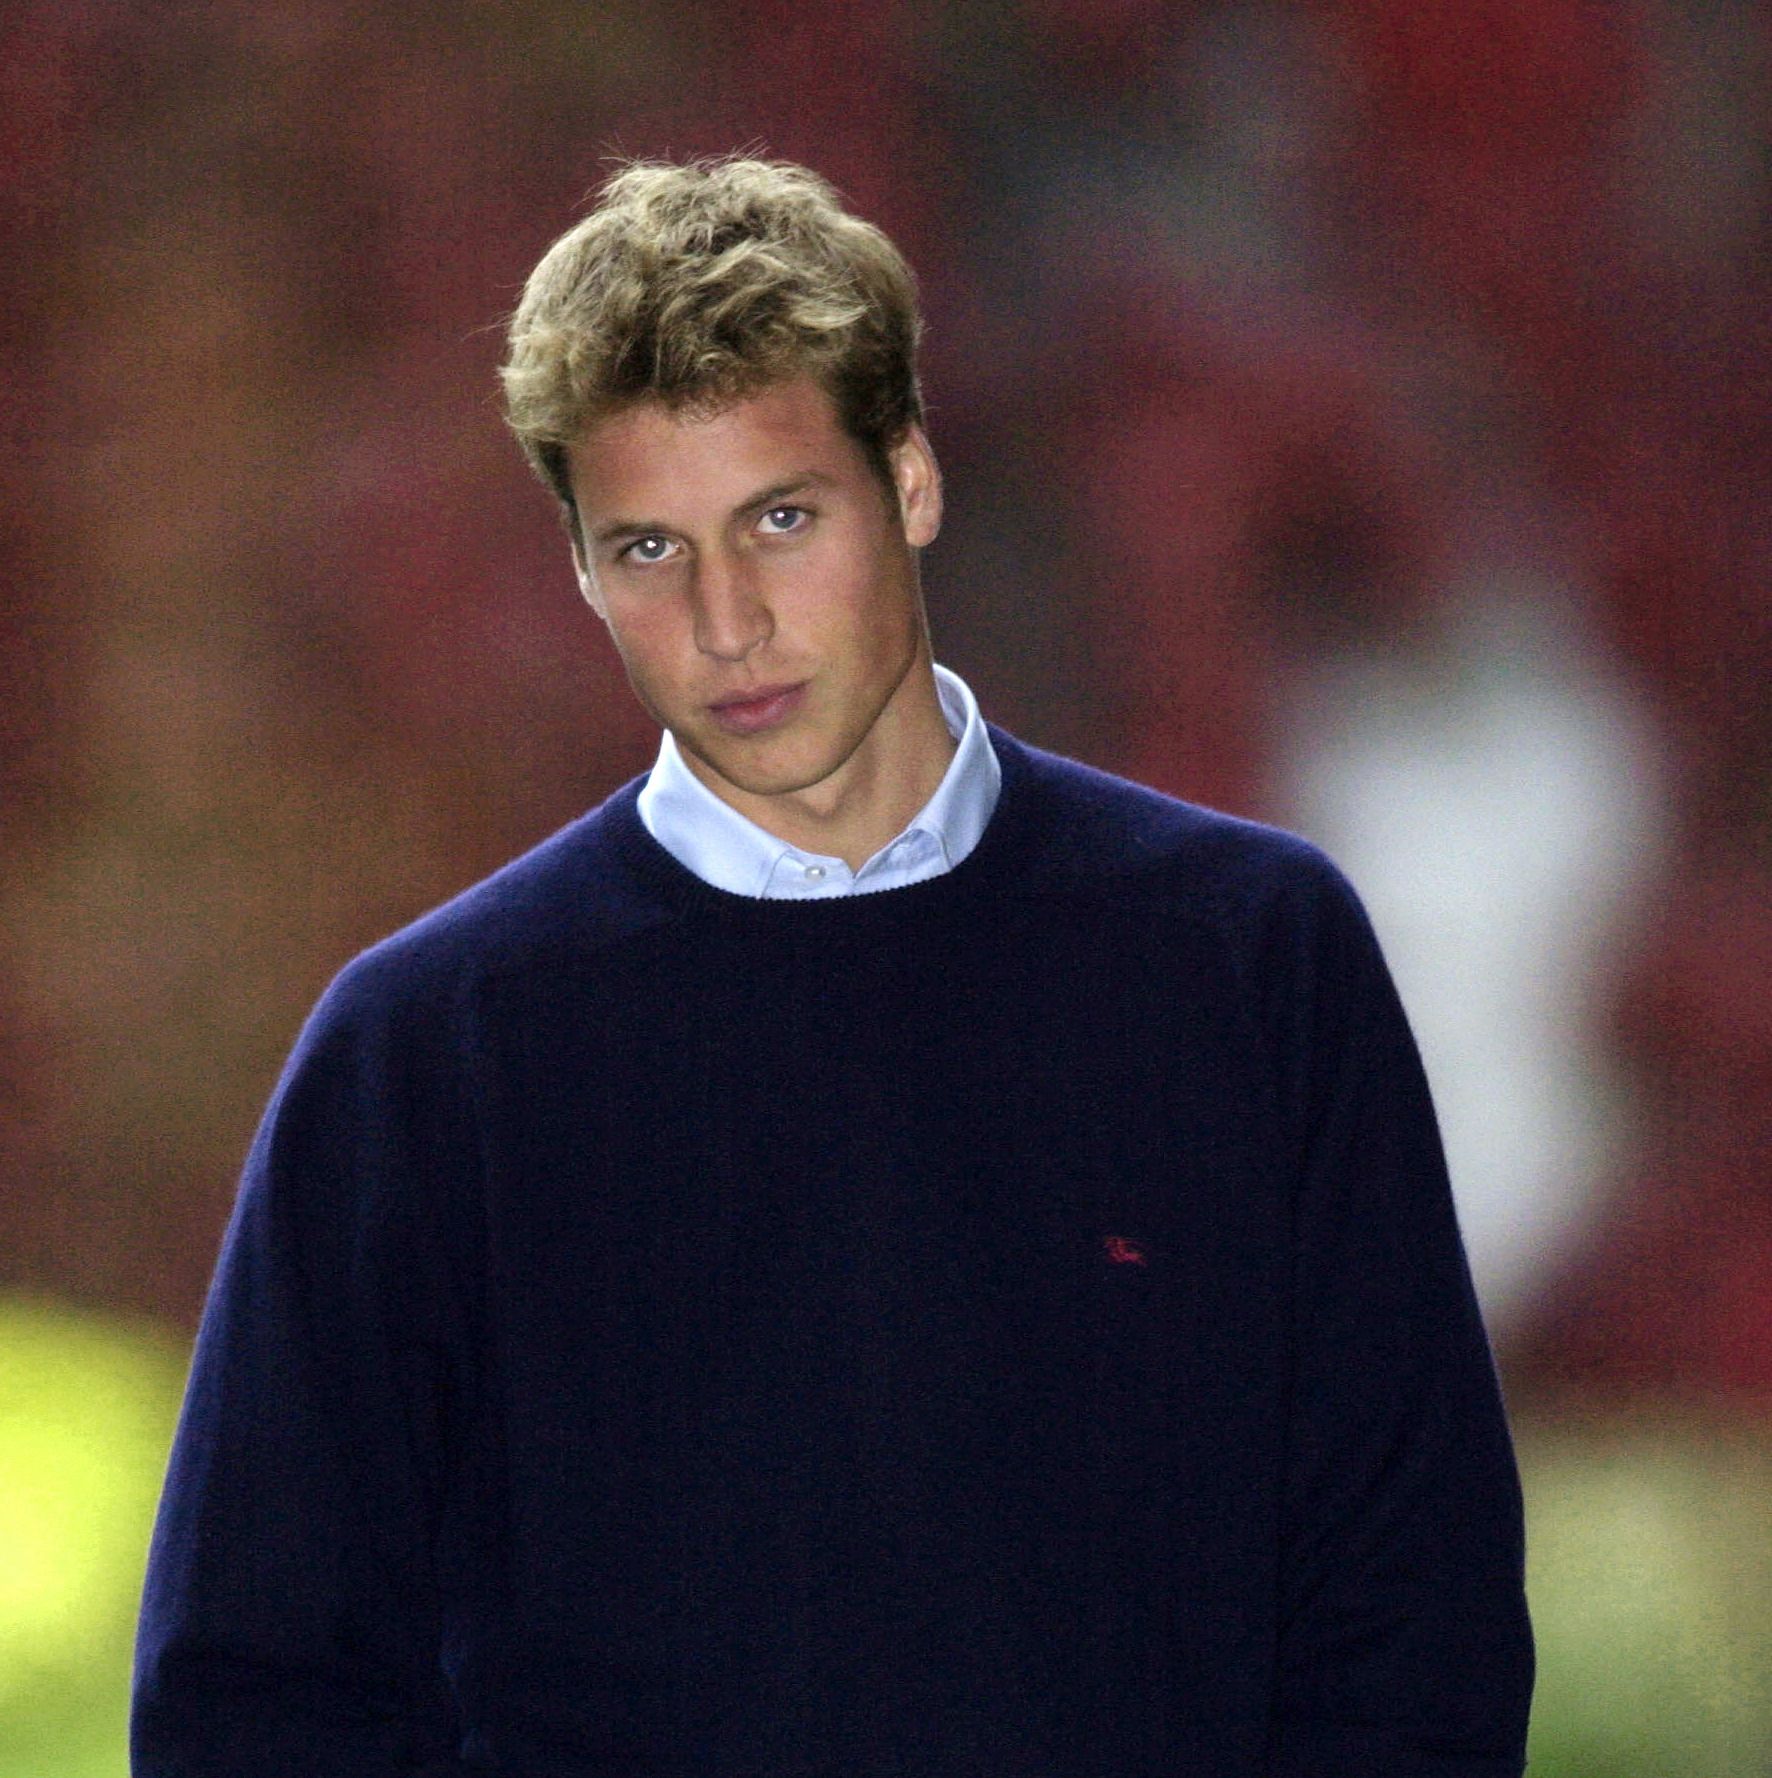 With The Crown now at an end, take a look back at Prince William's dating history.